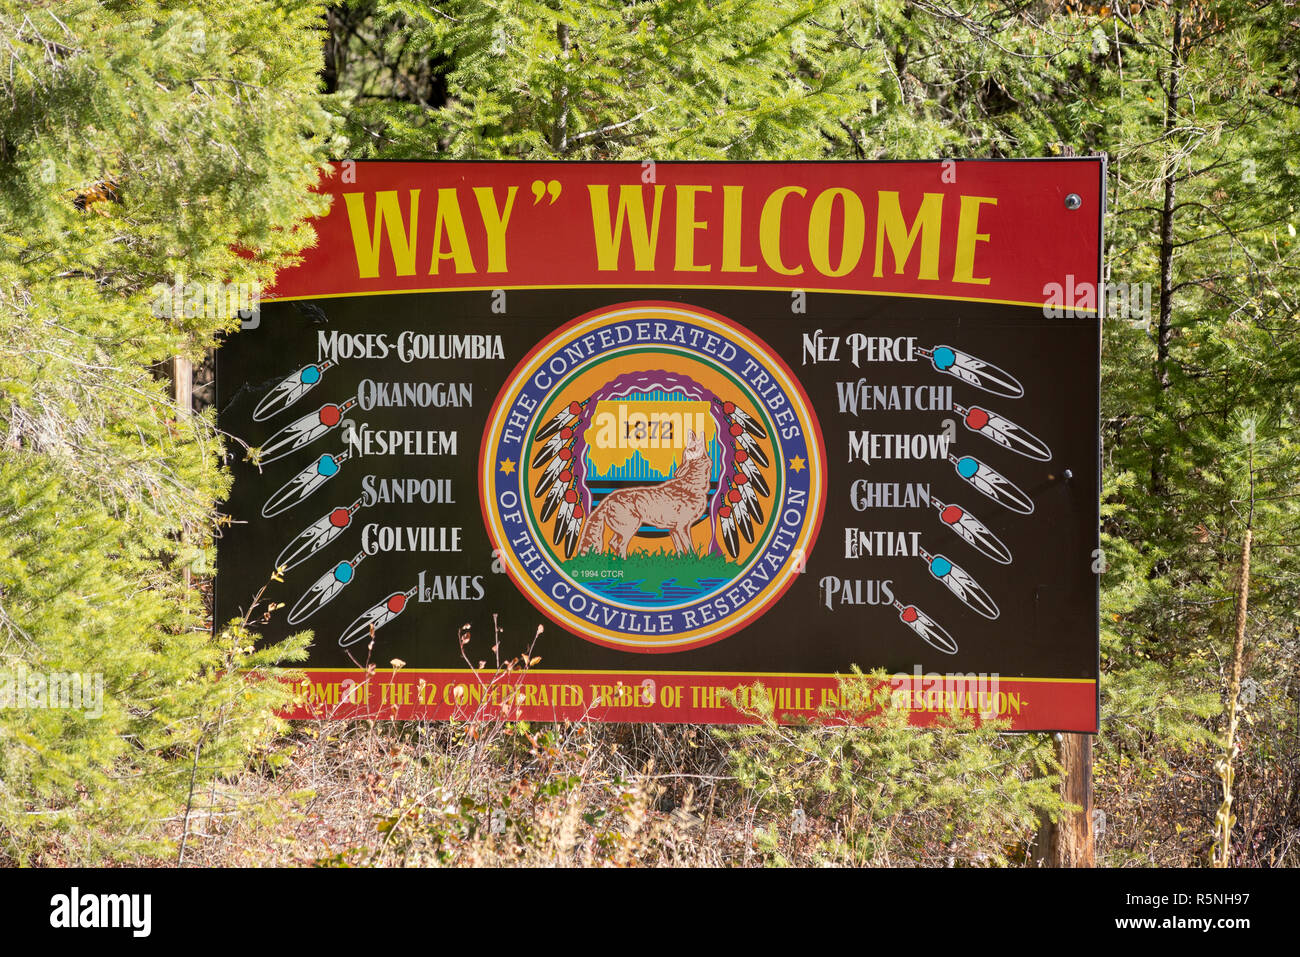 Welcome sign, Collville Indian Reservation, Washington. Stock Photo